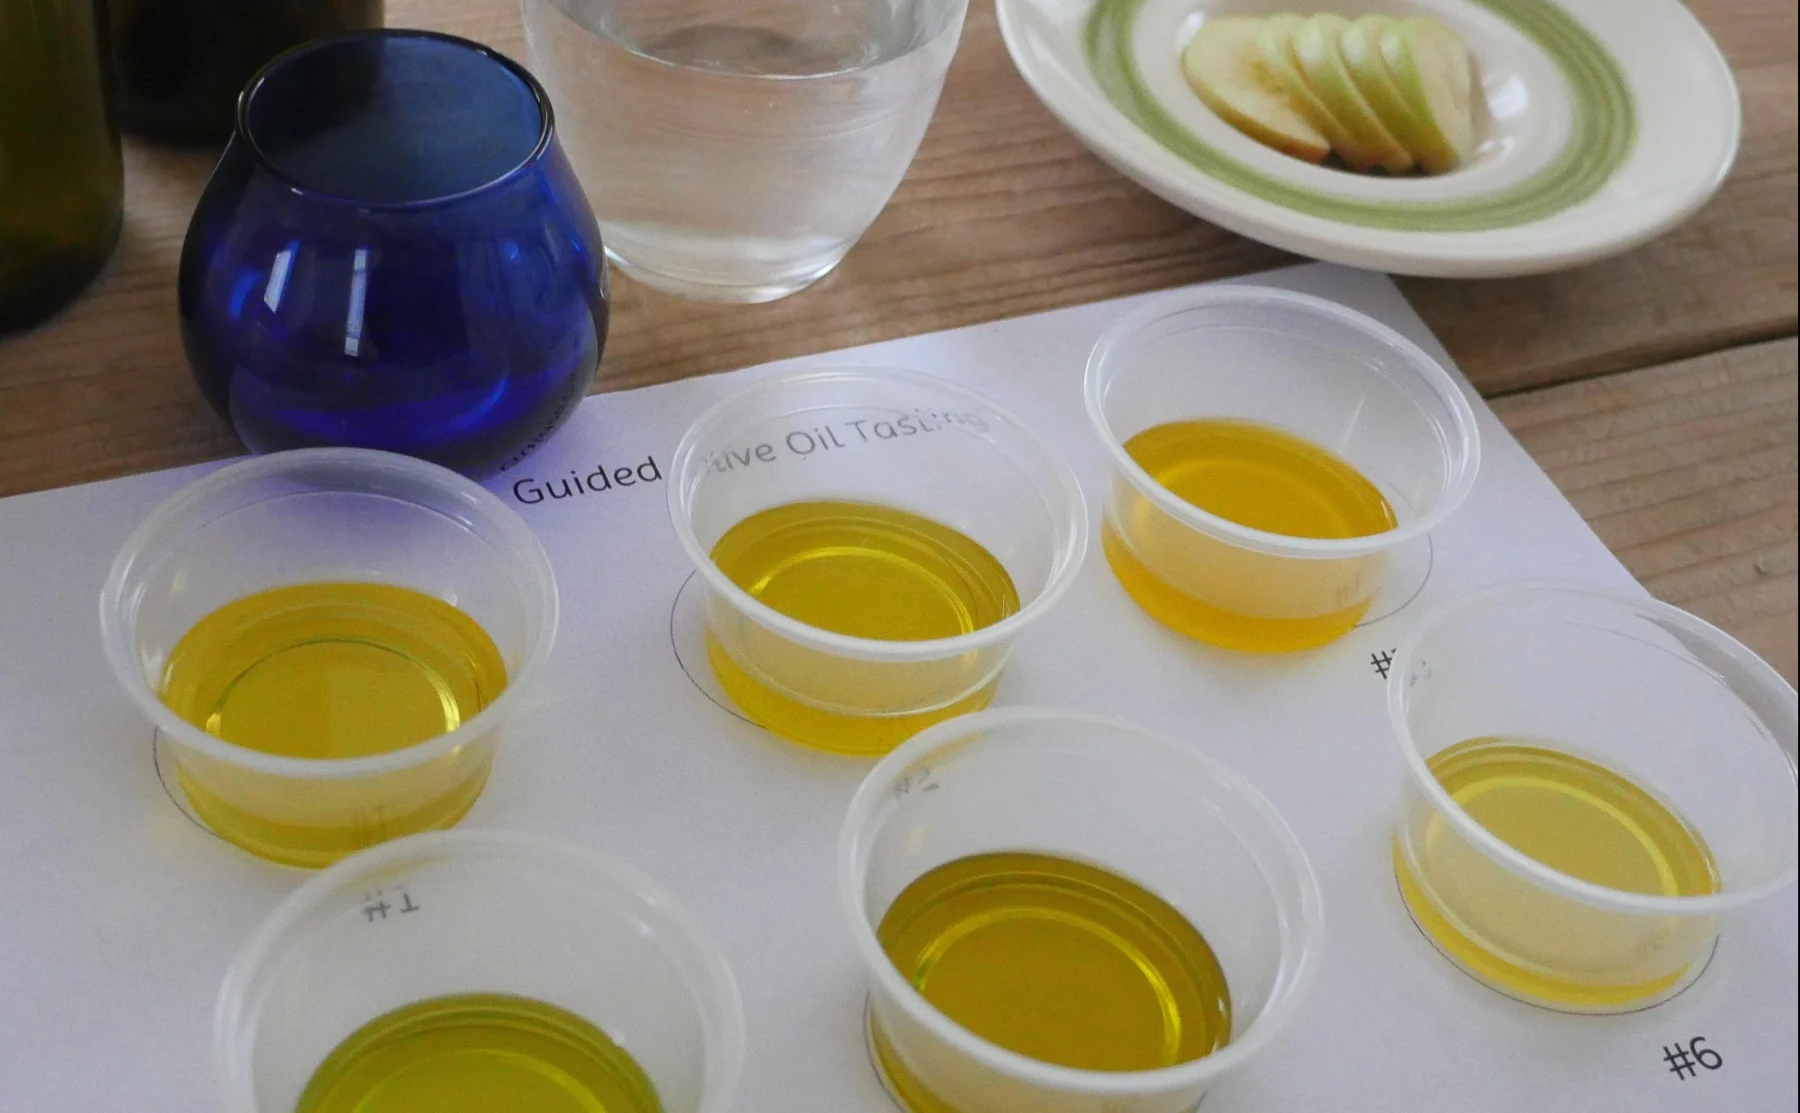 Discover how to taste the olive oil - 462292